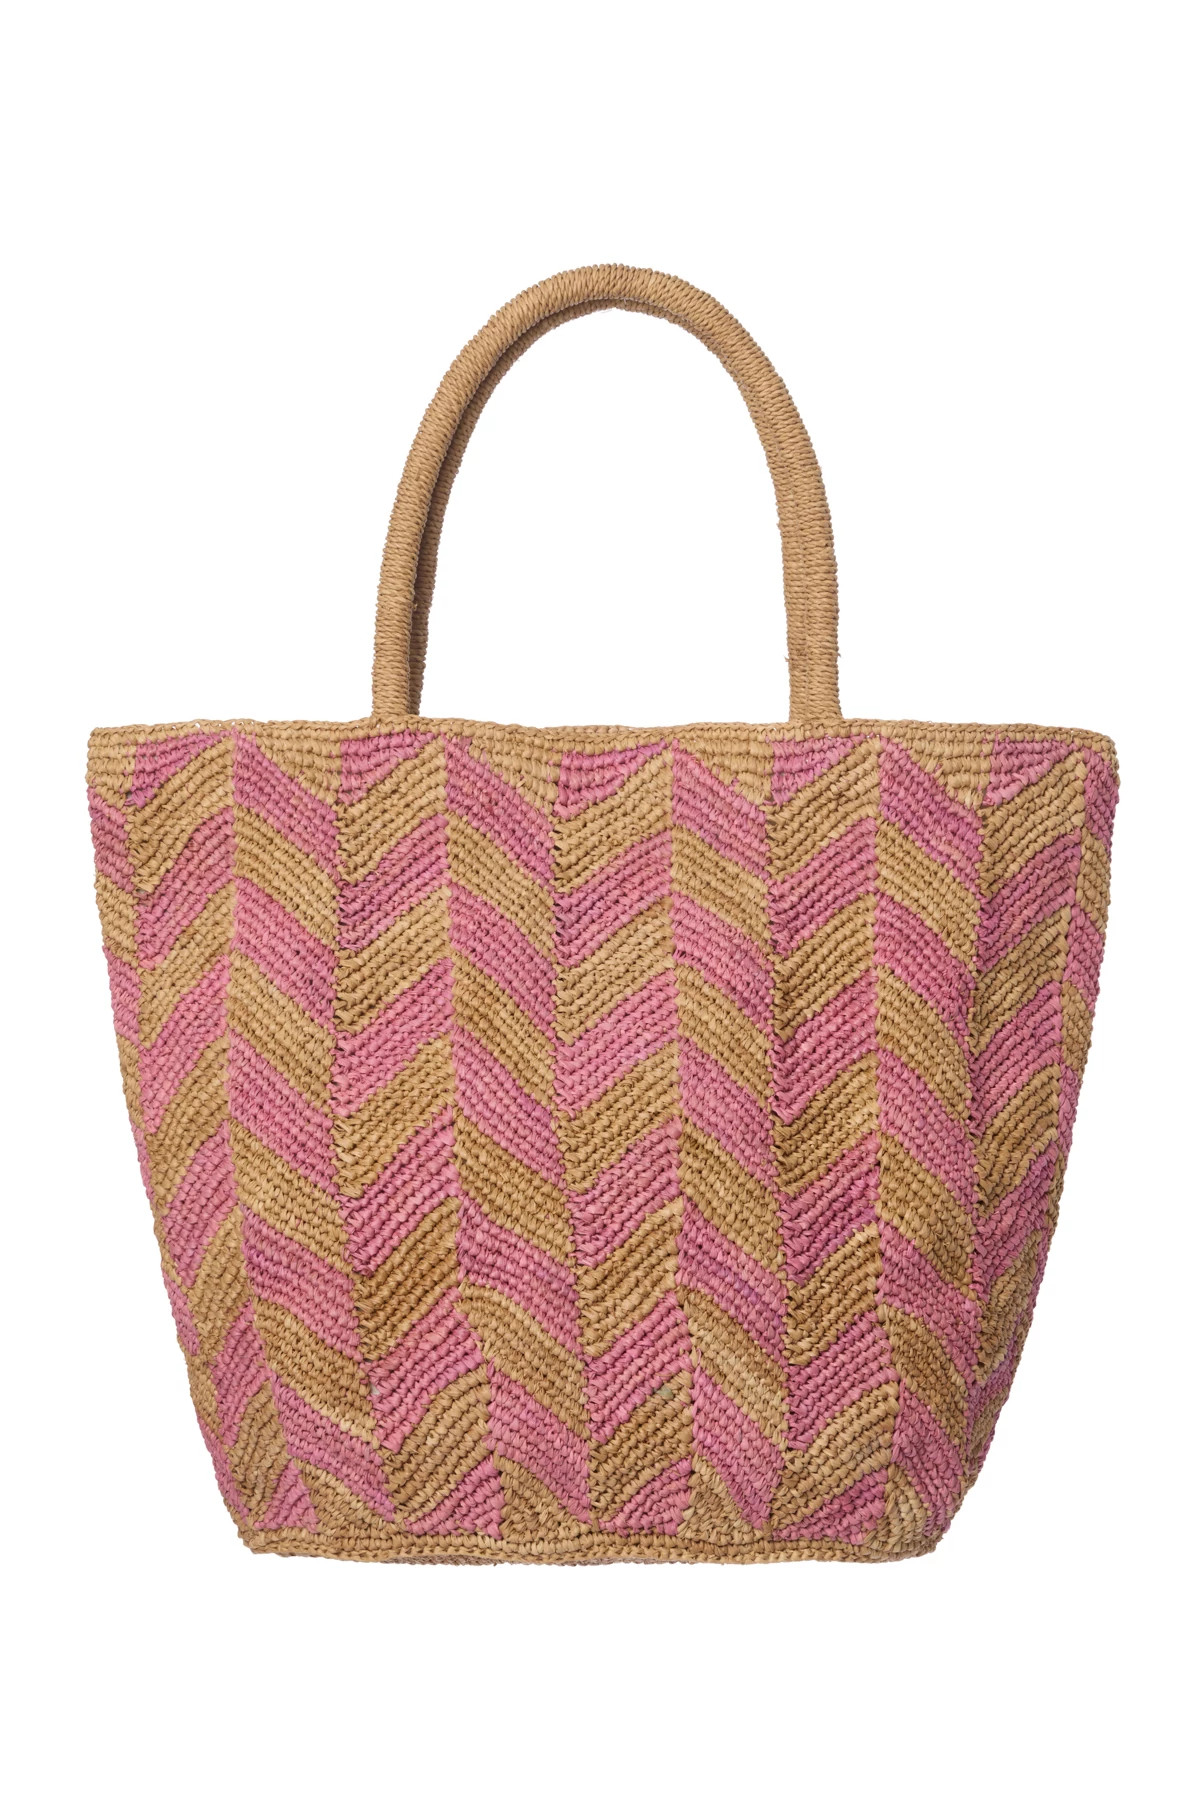 LILAC/SAND Chevron Tote Bag image number 1